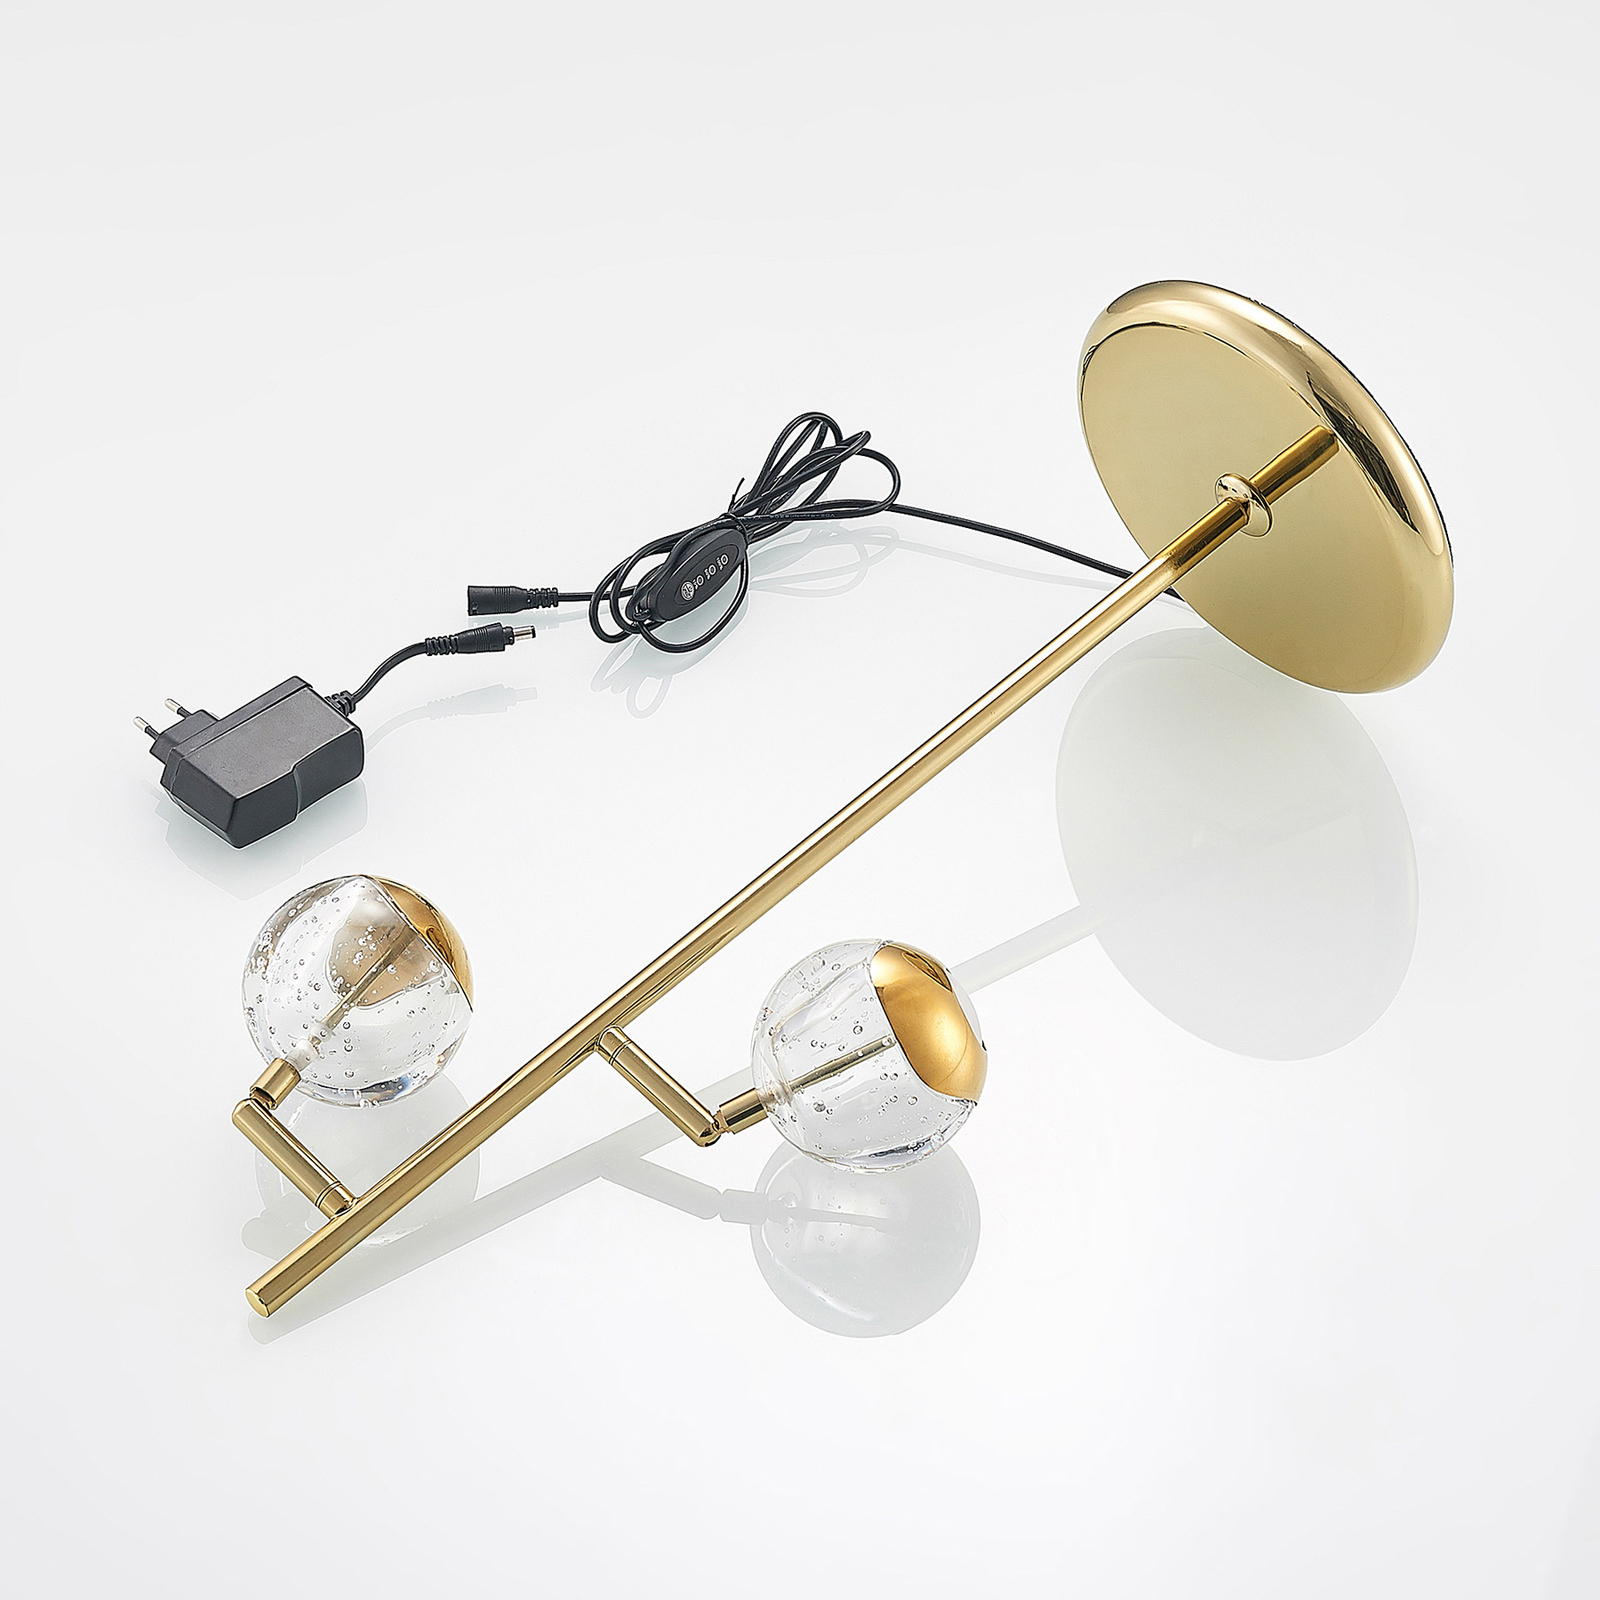 Lucande Kilio LED table lamp, dimmable, in gold